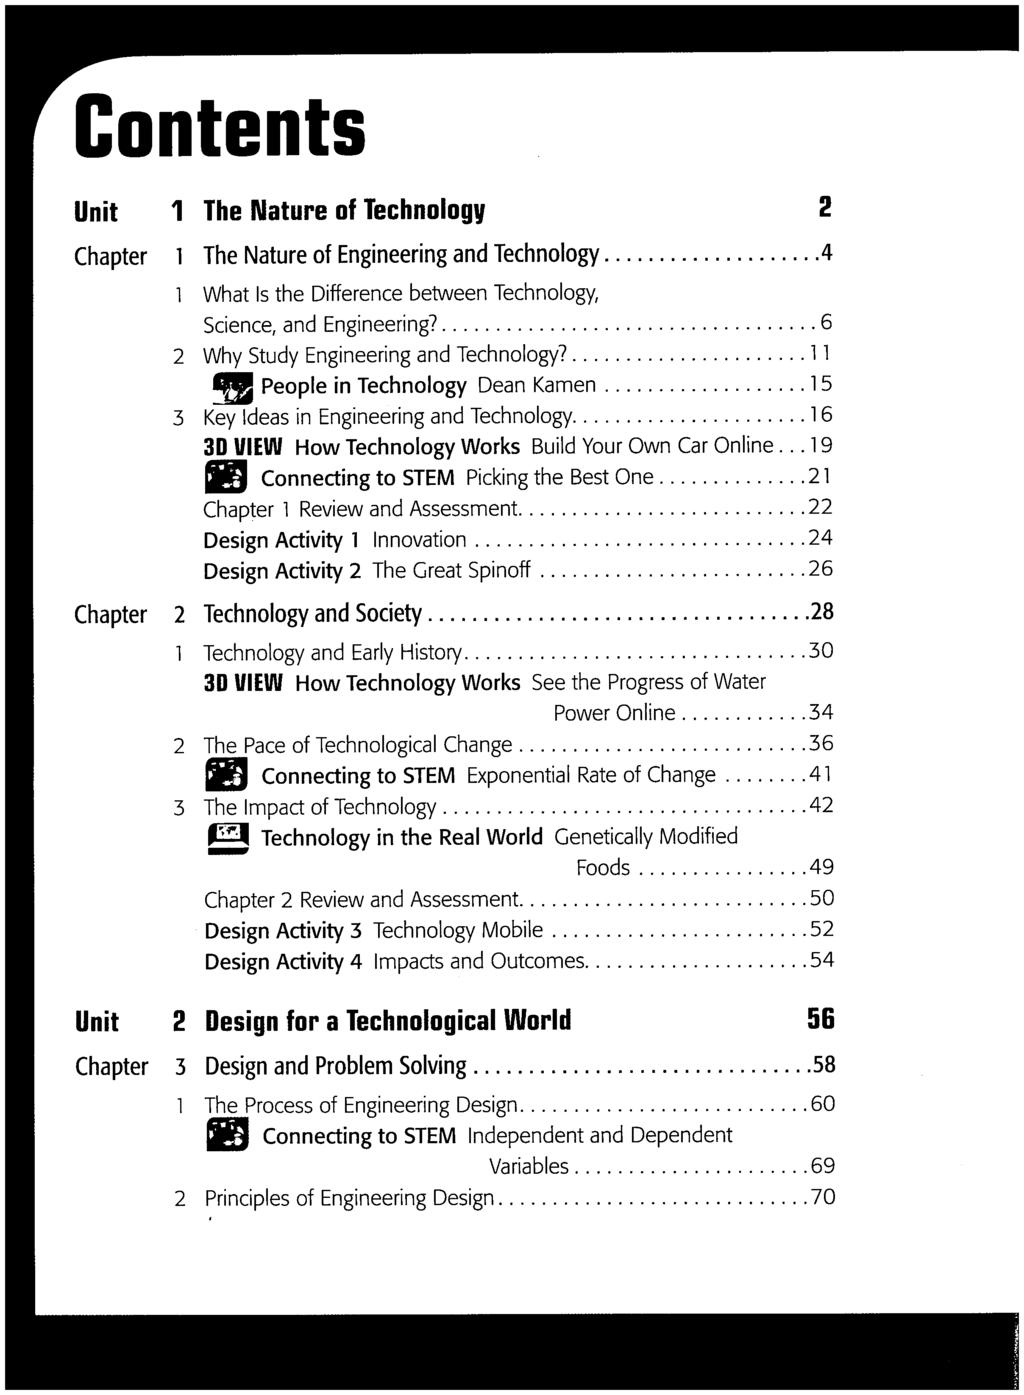 Contents Unit 1 The Nature of Technology 2 Chapter 1 The Nature of Engineering and Technology 4 1 What Is the Difference between Technology, Science, and Engineering?